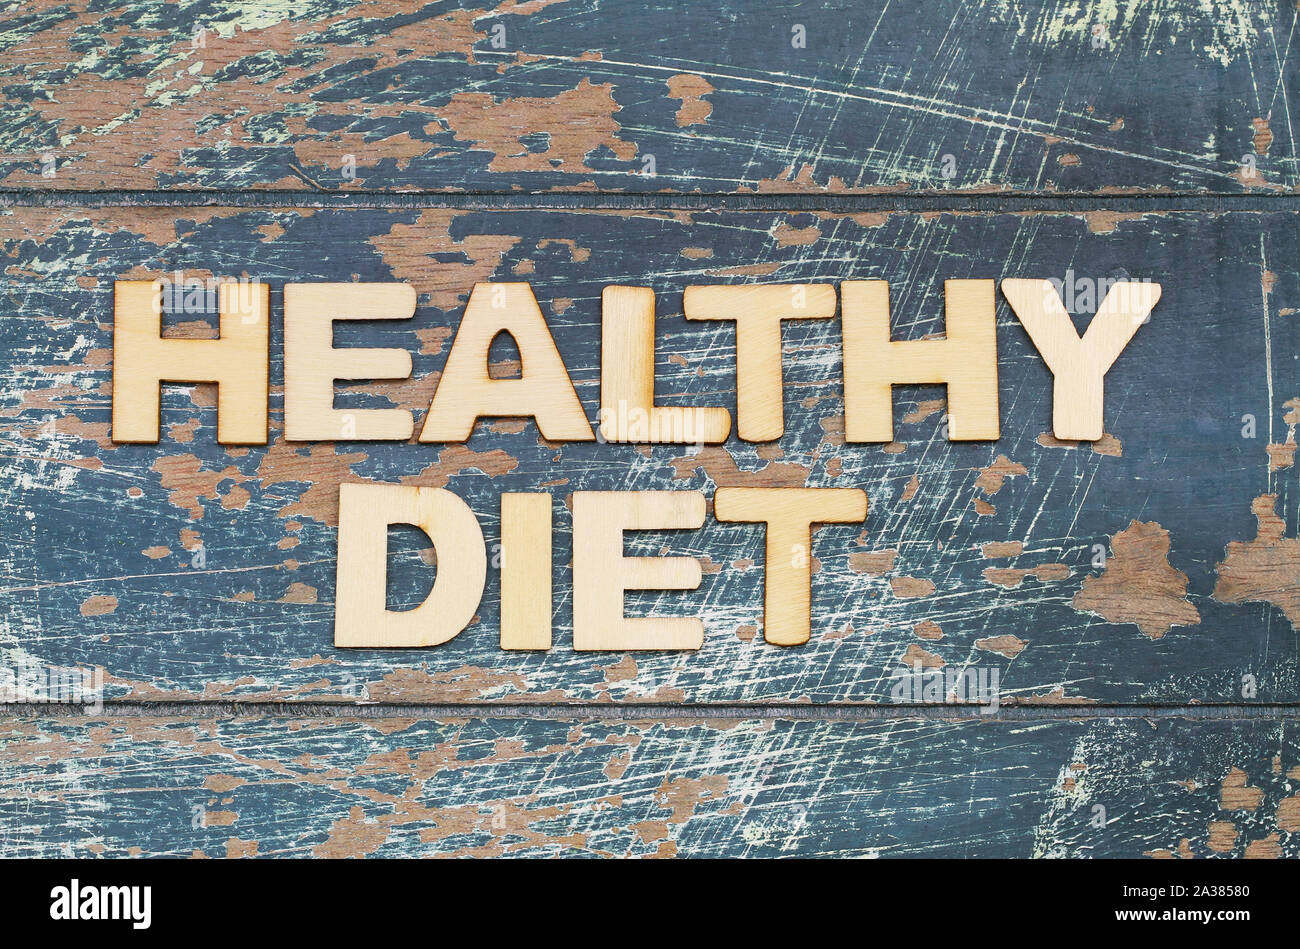 Healthy diet written with wooden letters on rustic wooden surface Stock Photo